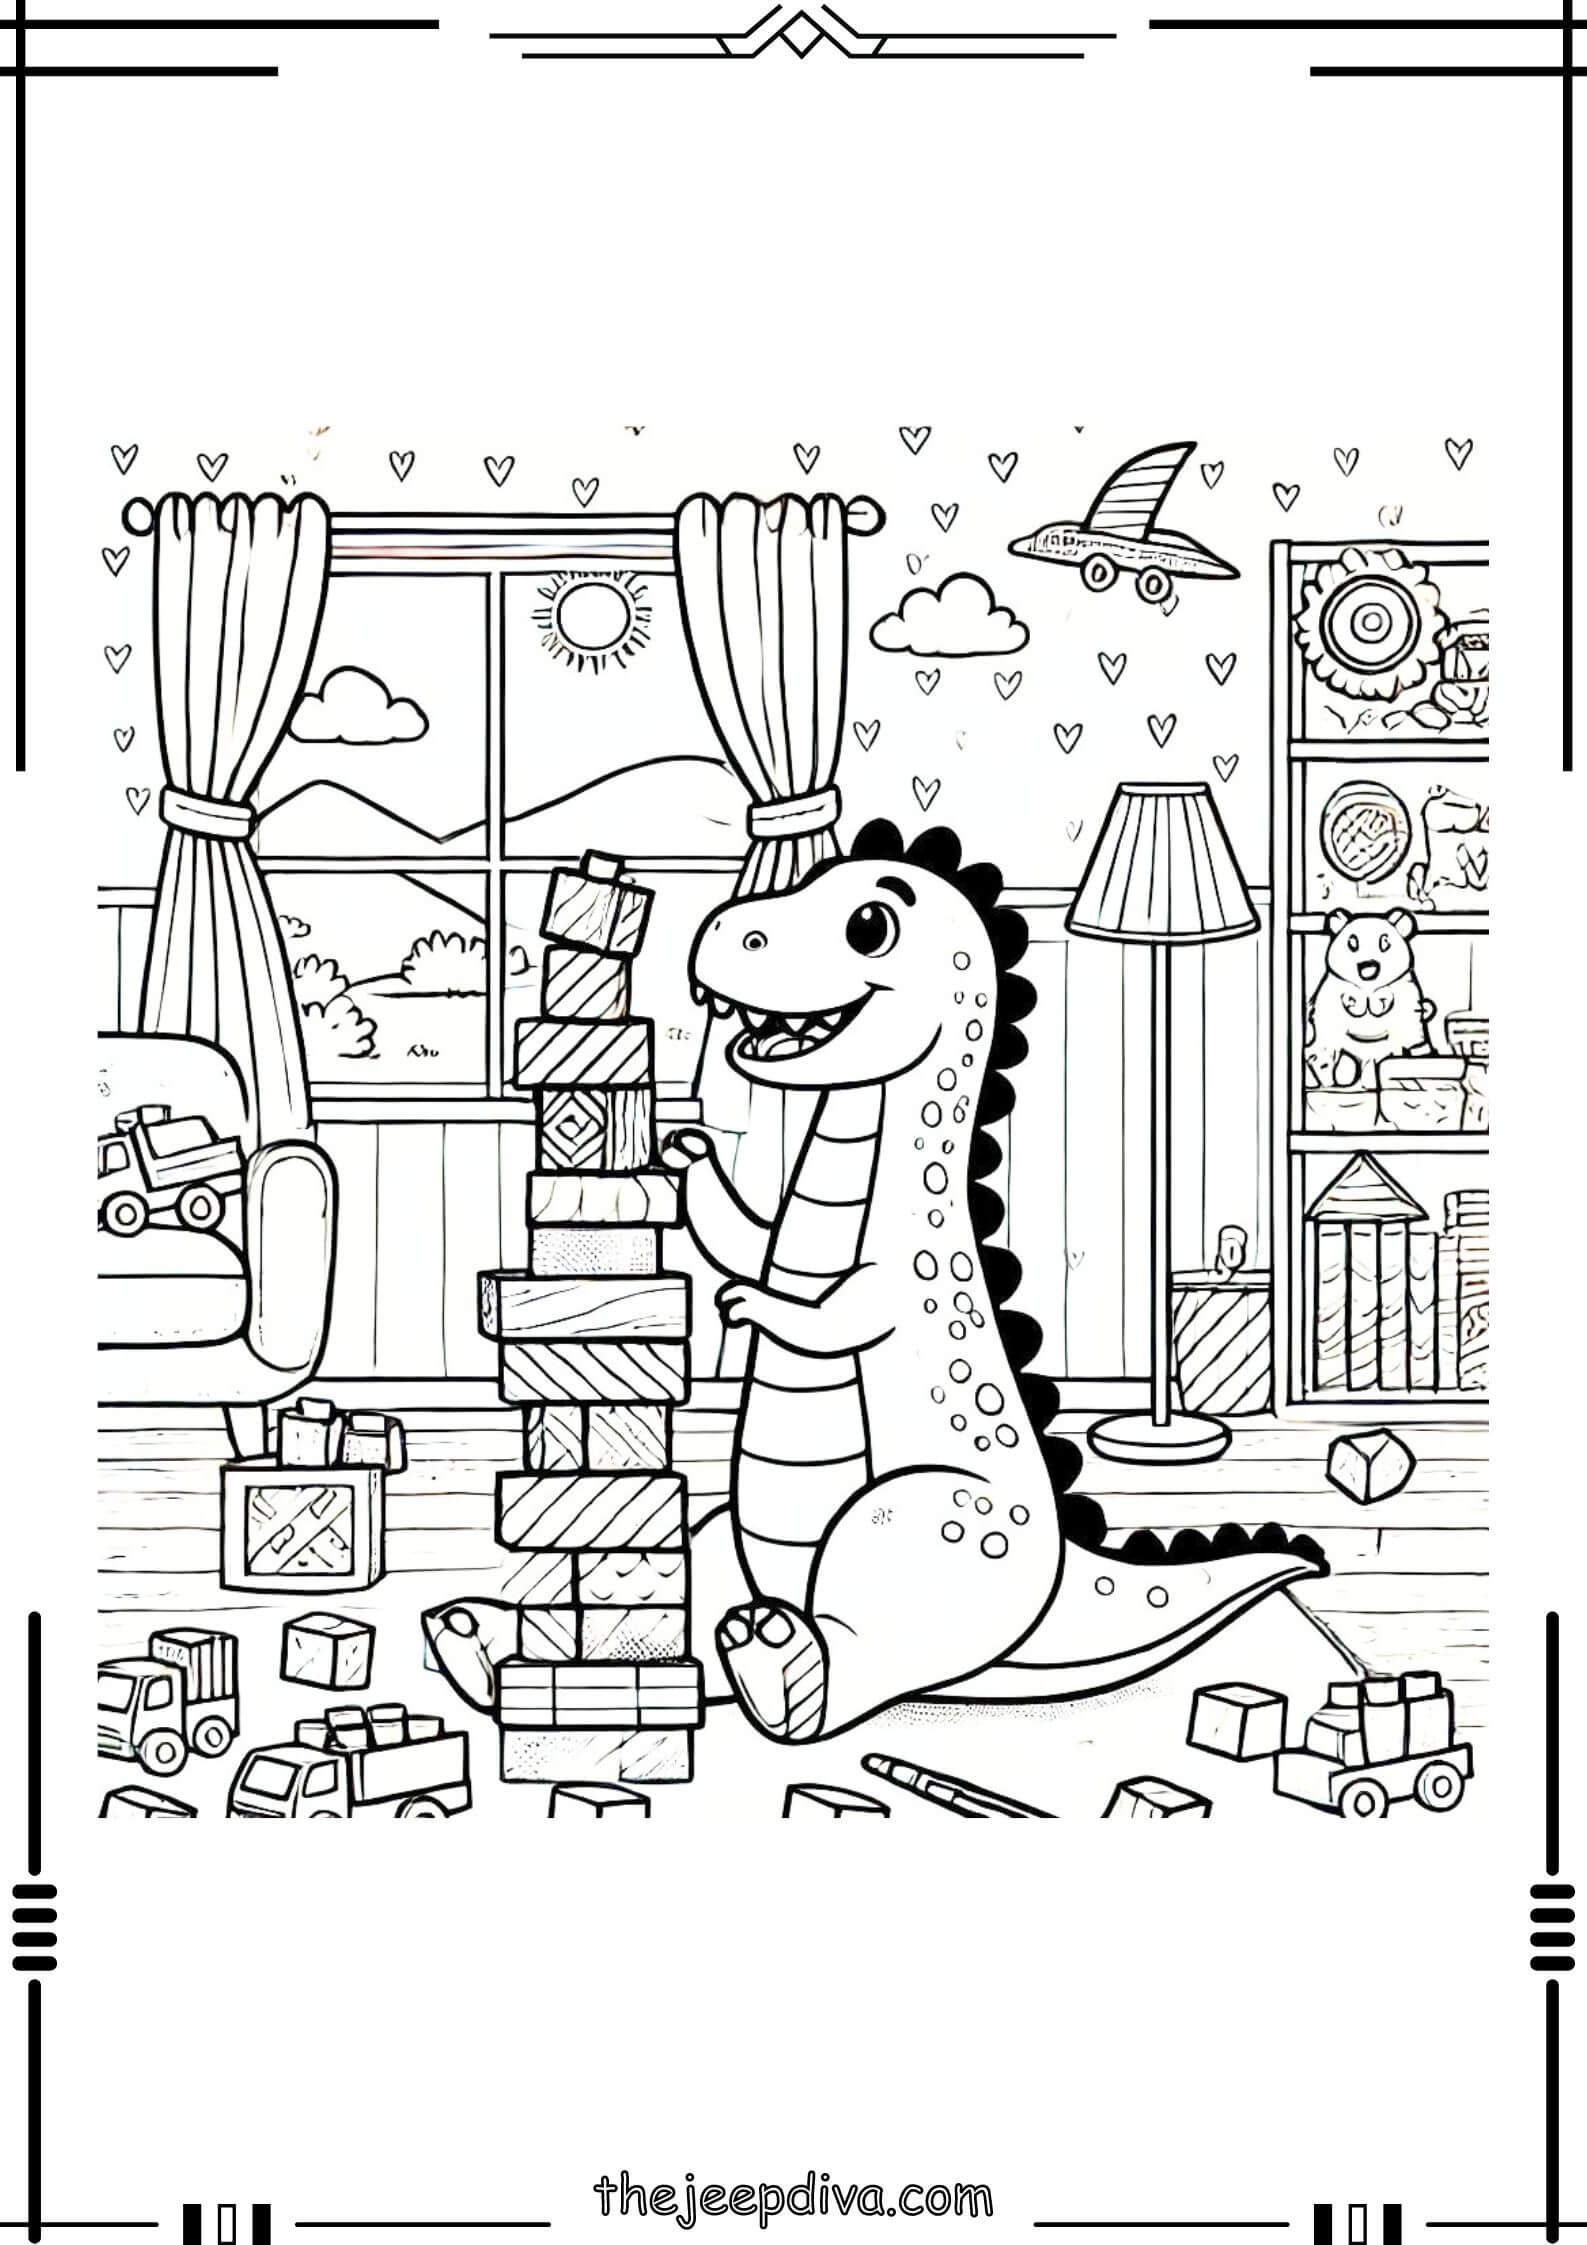 Dinosaur-Colouring-Pages-Hard-24